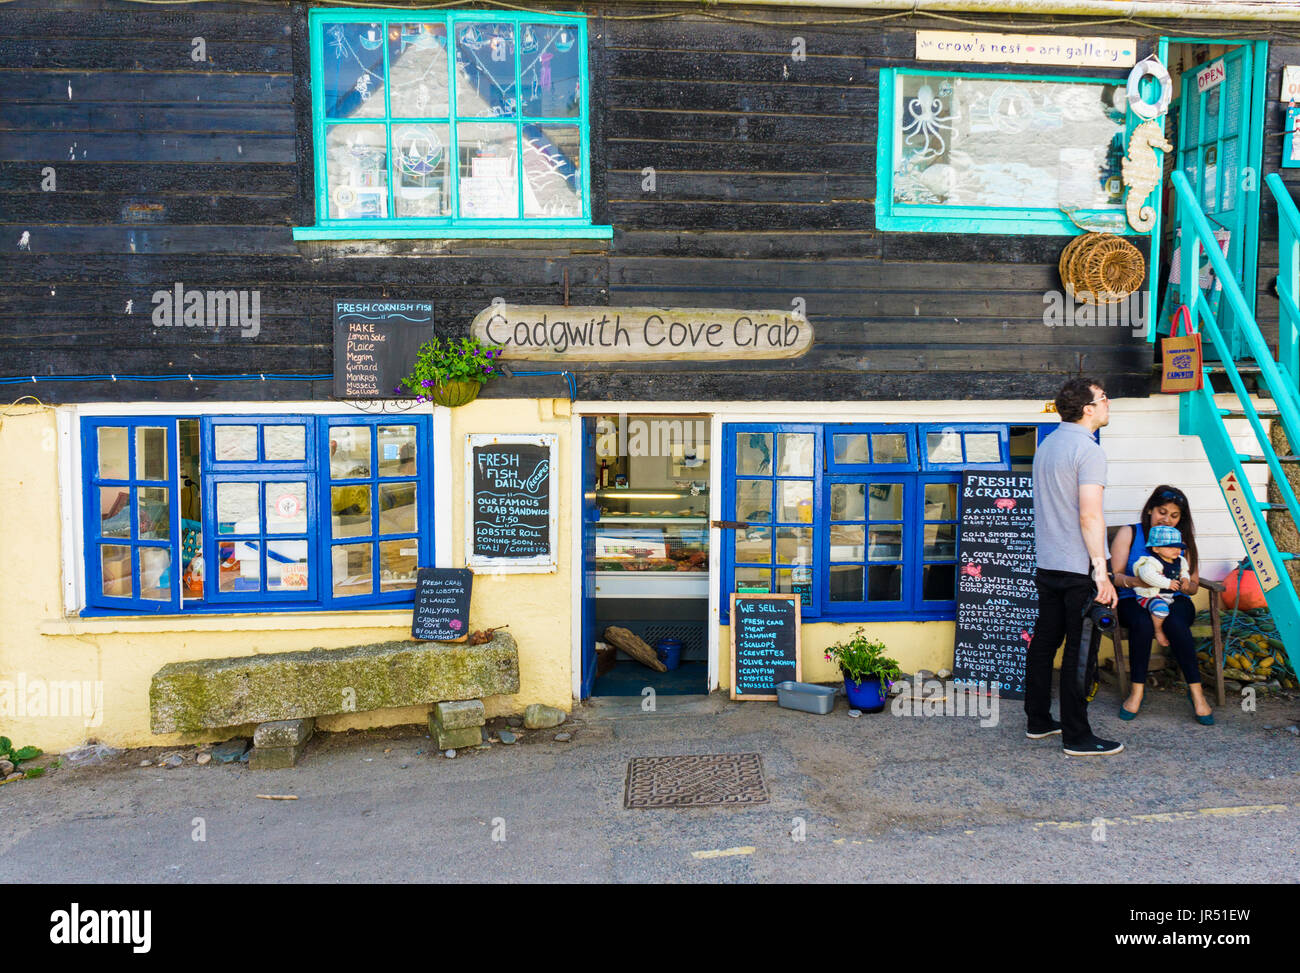 Cadgwith Cove Crab fresh fish shop in the fishing village of Cadgwith, Cornwall, UK Stock Photo